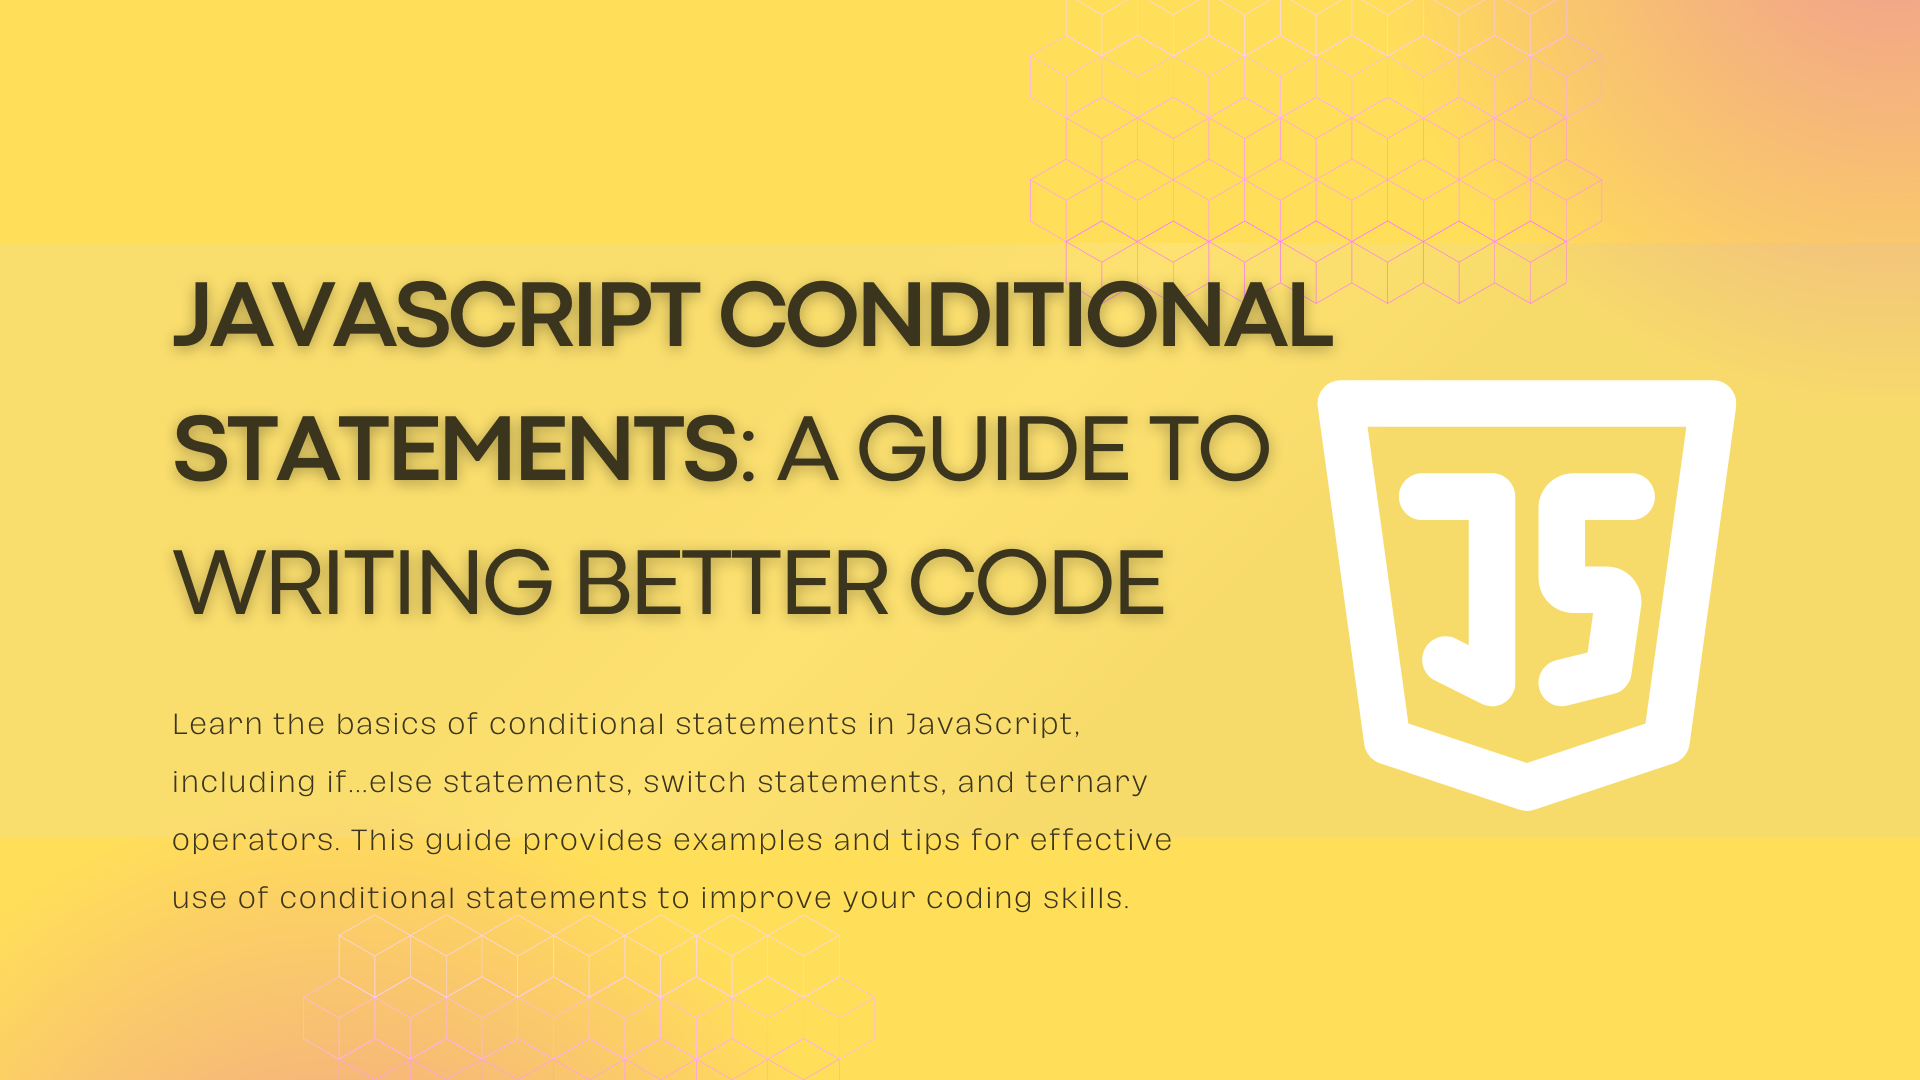 JavaScript Conditional Statements: A Guide to Writing Better Code